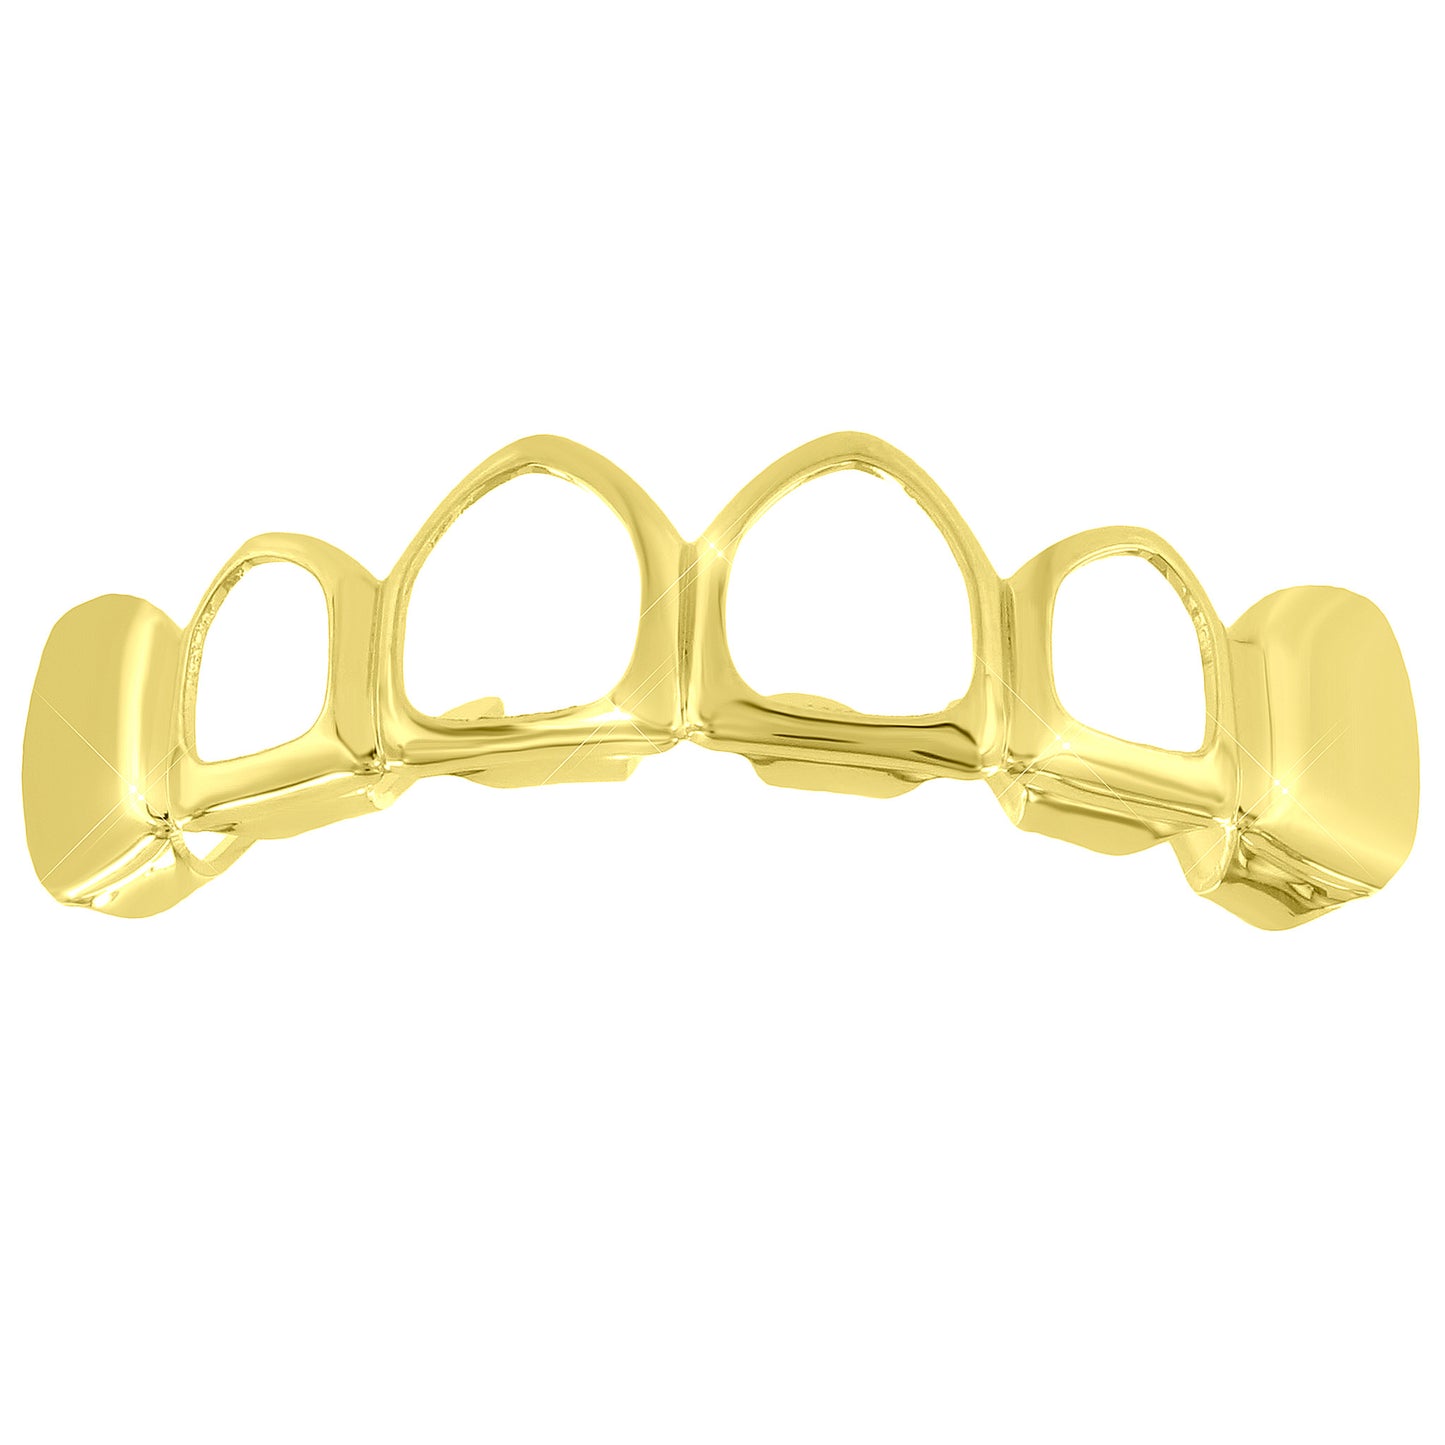 Top Teeth Mouth Grillz Cut  Yellow Gold Finish